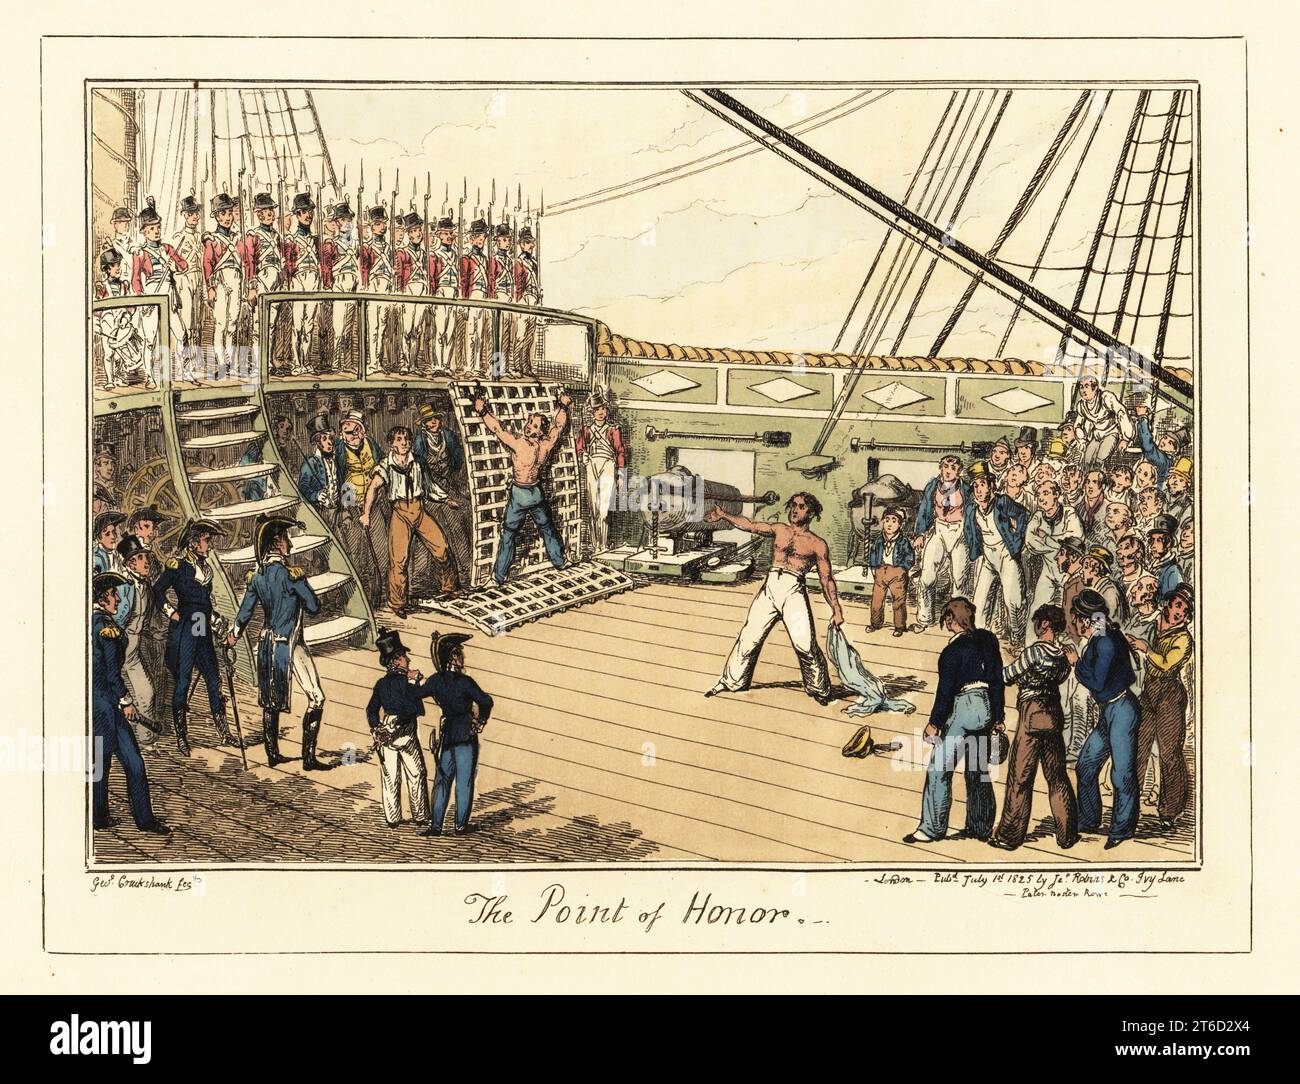 A Royal Navy sailor tied to a grating on deck for punishment with the cat-o-nine-tails. The bosun's mate with his whip, officers in uniform, marines on the quarterdeck, all crew on deck. Another sailor with his shirt off confessing to disobeying orders. The Point of Honour. Handcoloured lithograph by George Cruikshank from Greenwich Hospital, a Series of Naval Sketches, by An Old Sailor (Matthew H. Barker), published by James Robins, London, 1826. Stock Photo